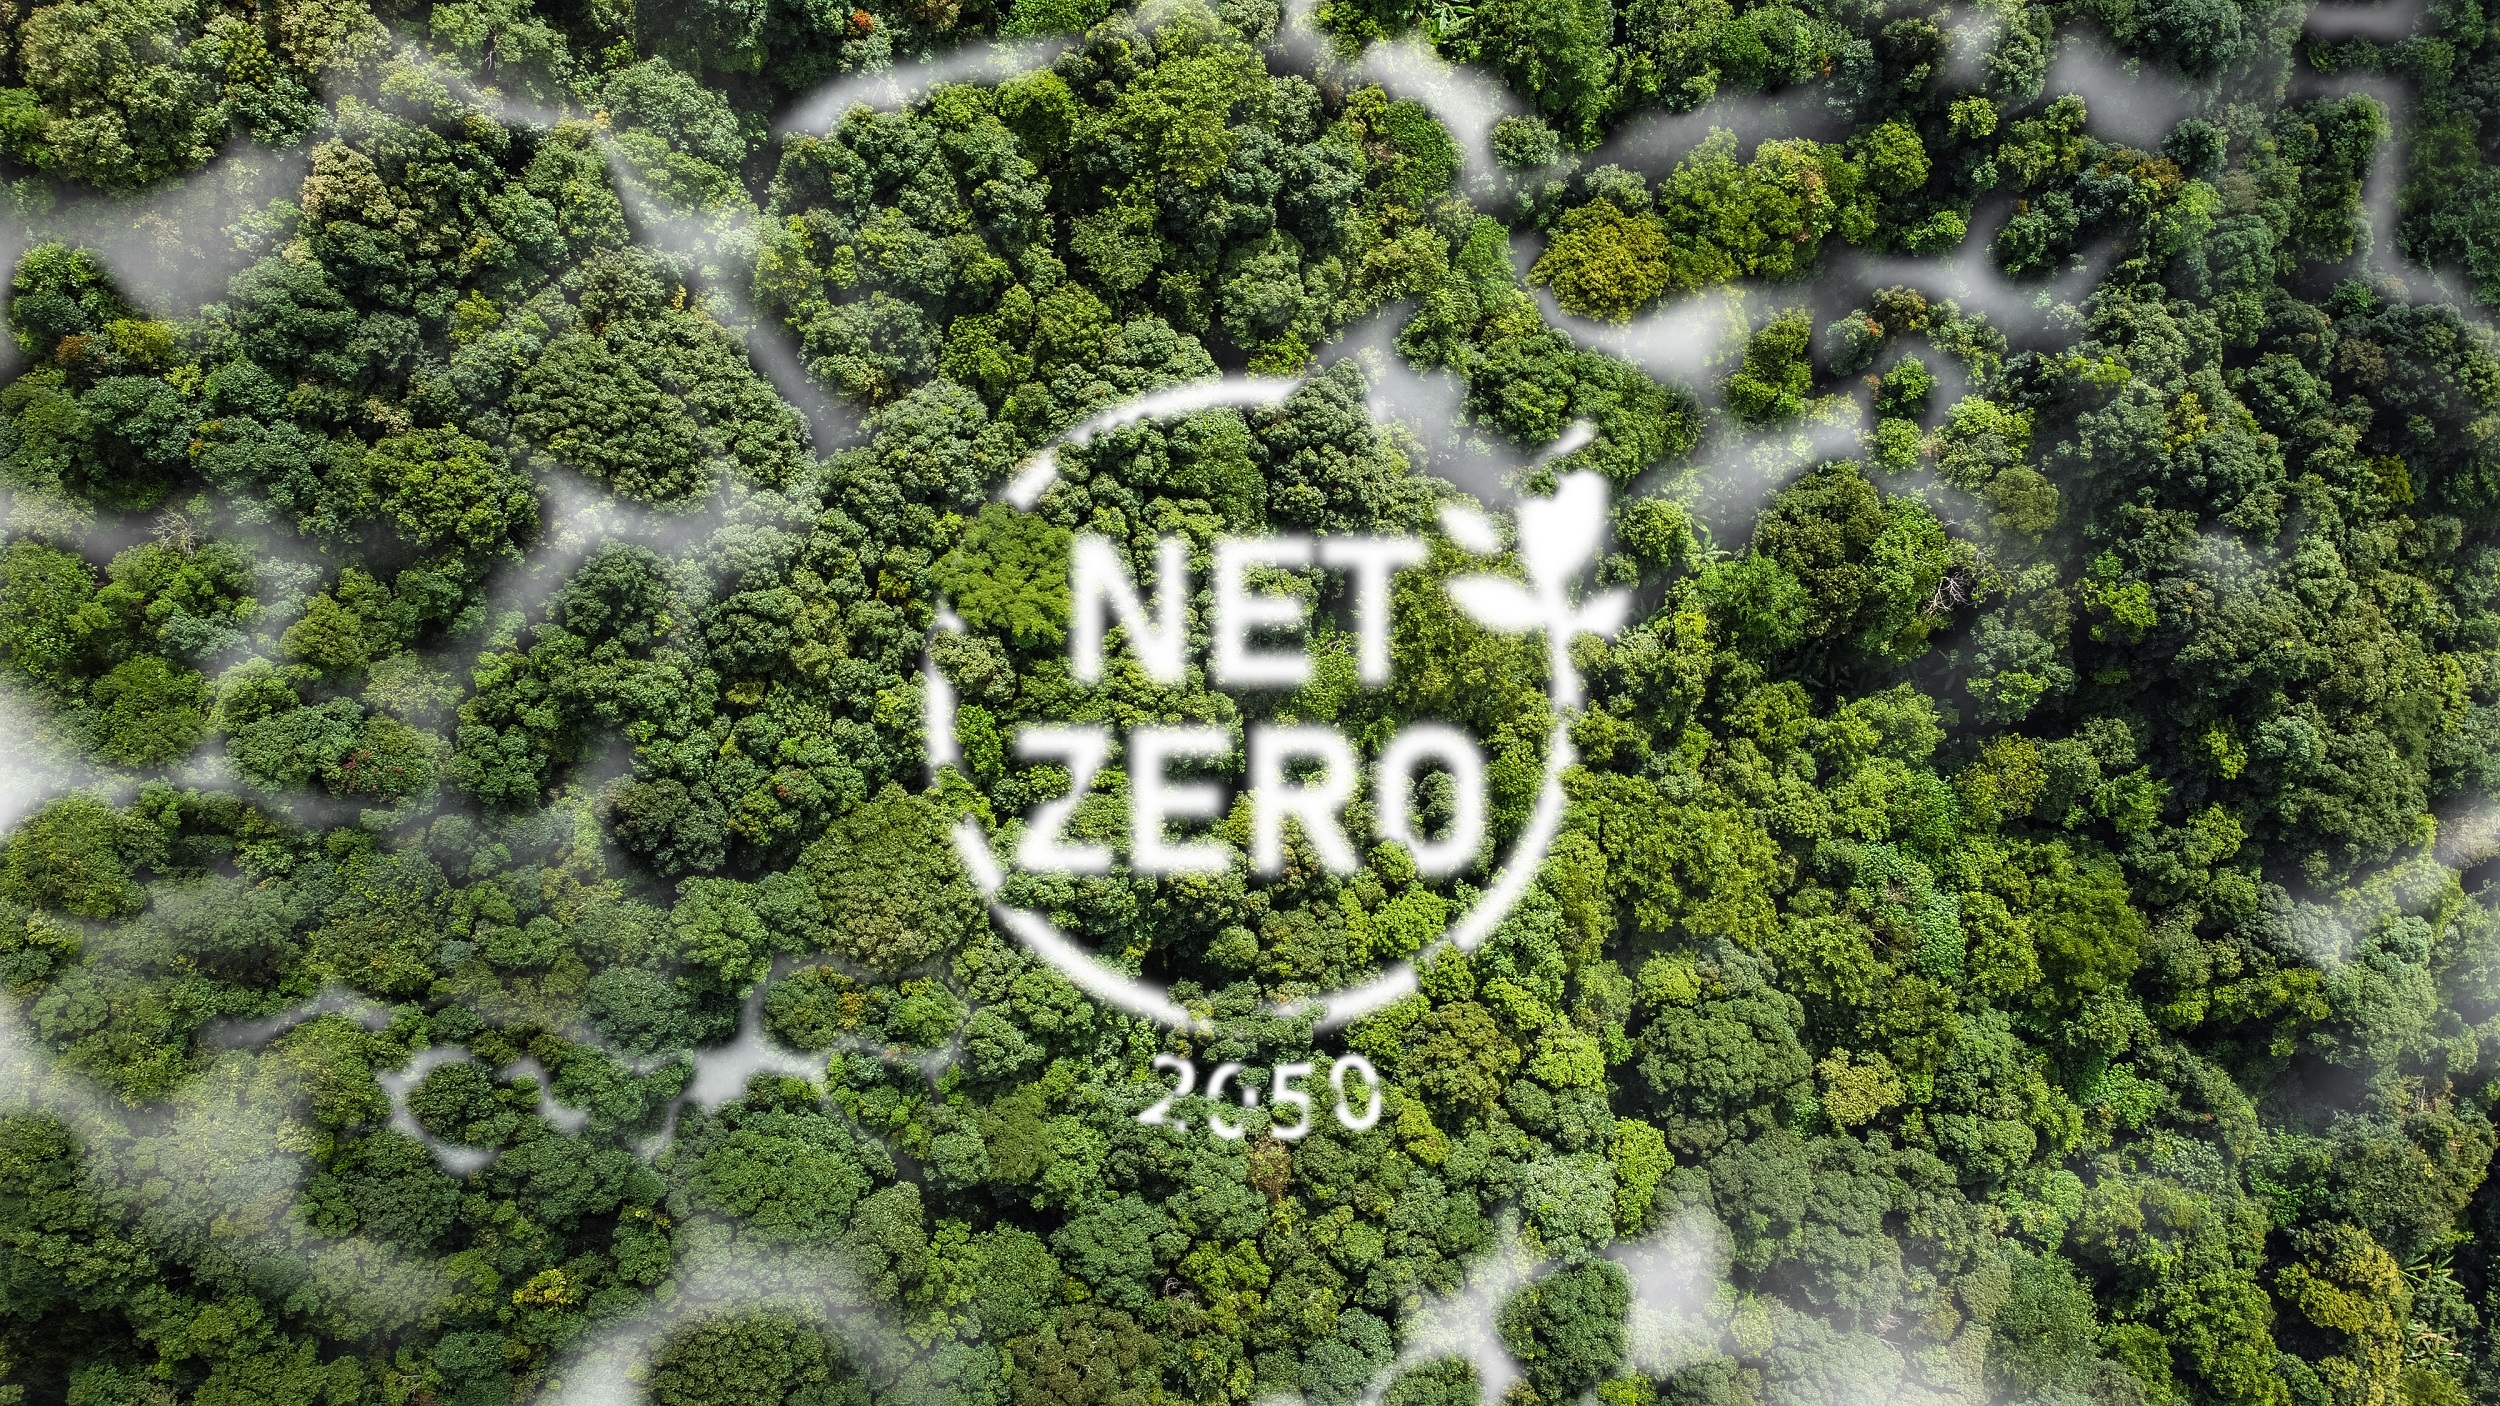 Aerial view of a woodland and in the centre are the words 'Net Zero 2050'.